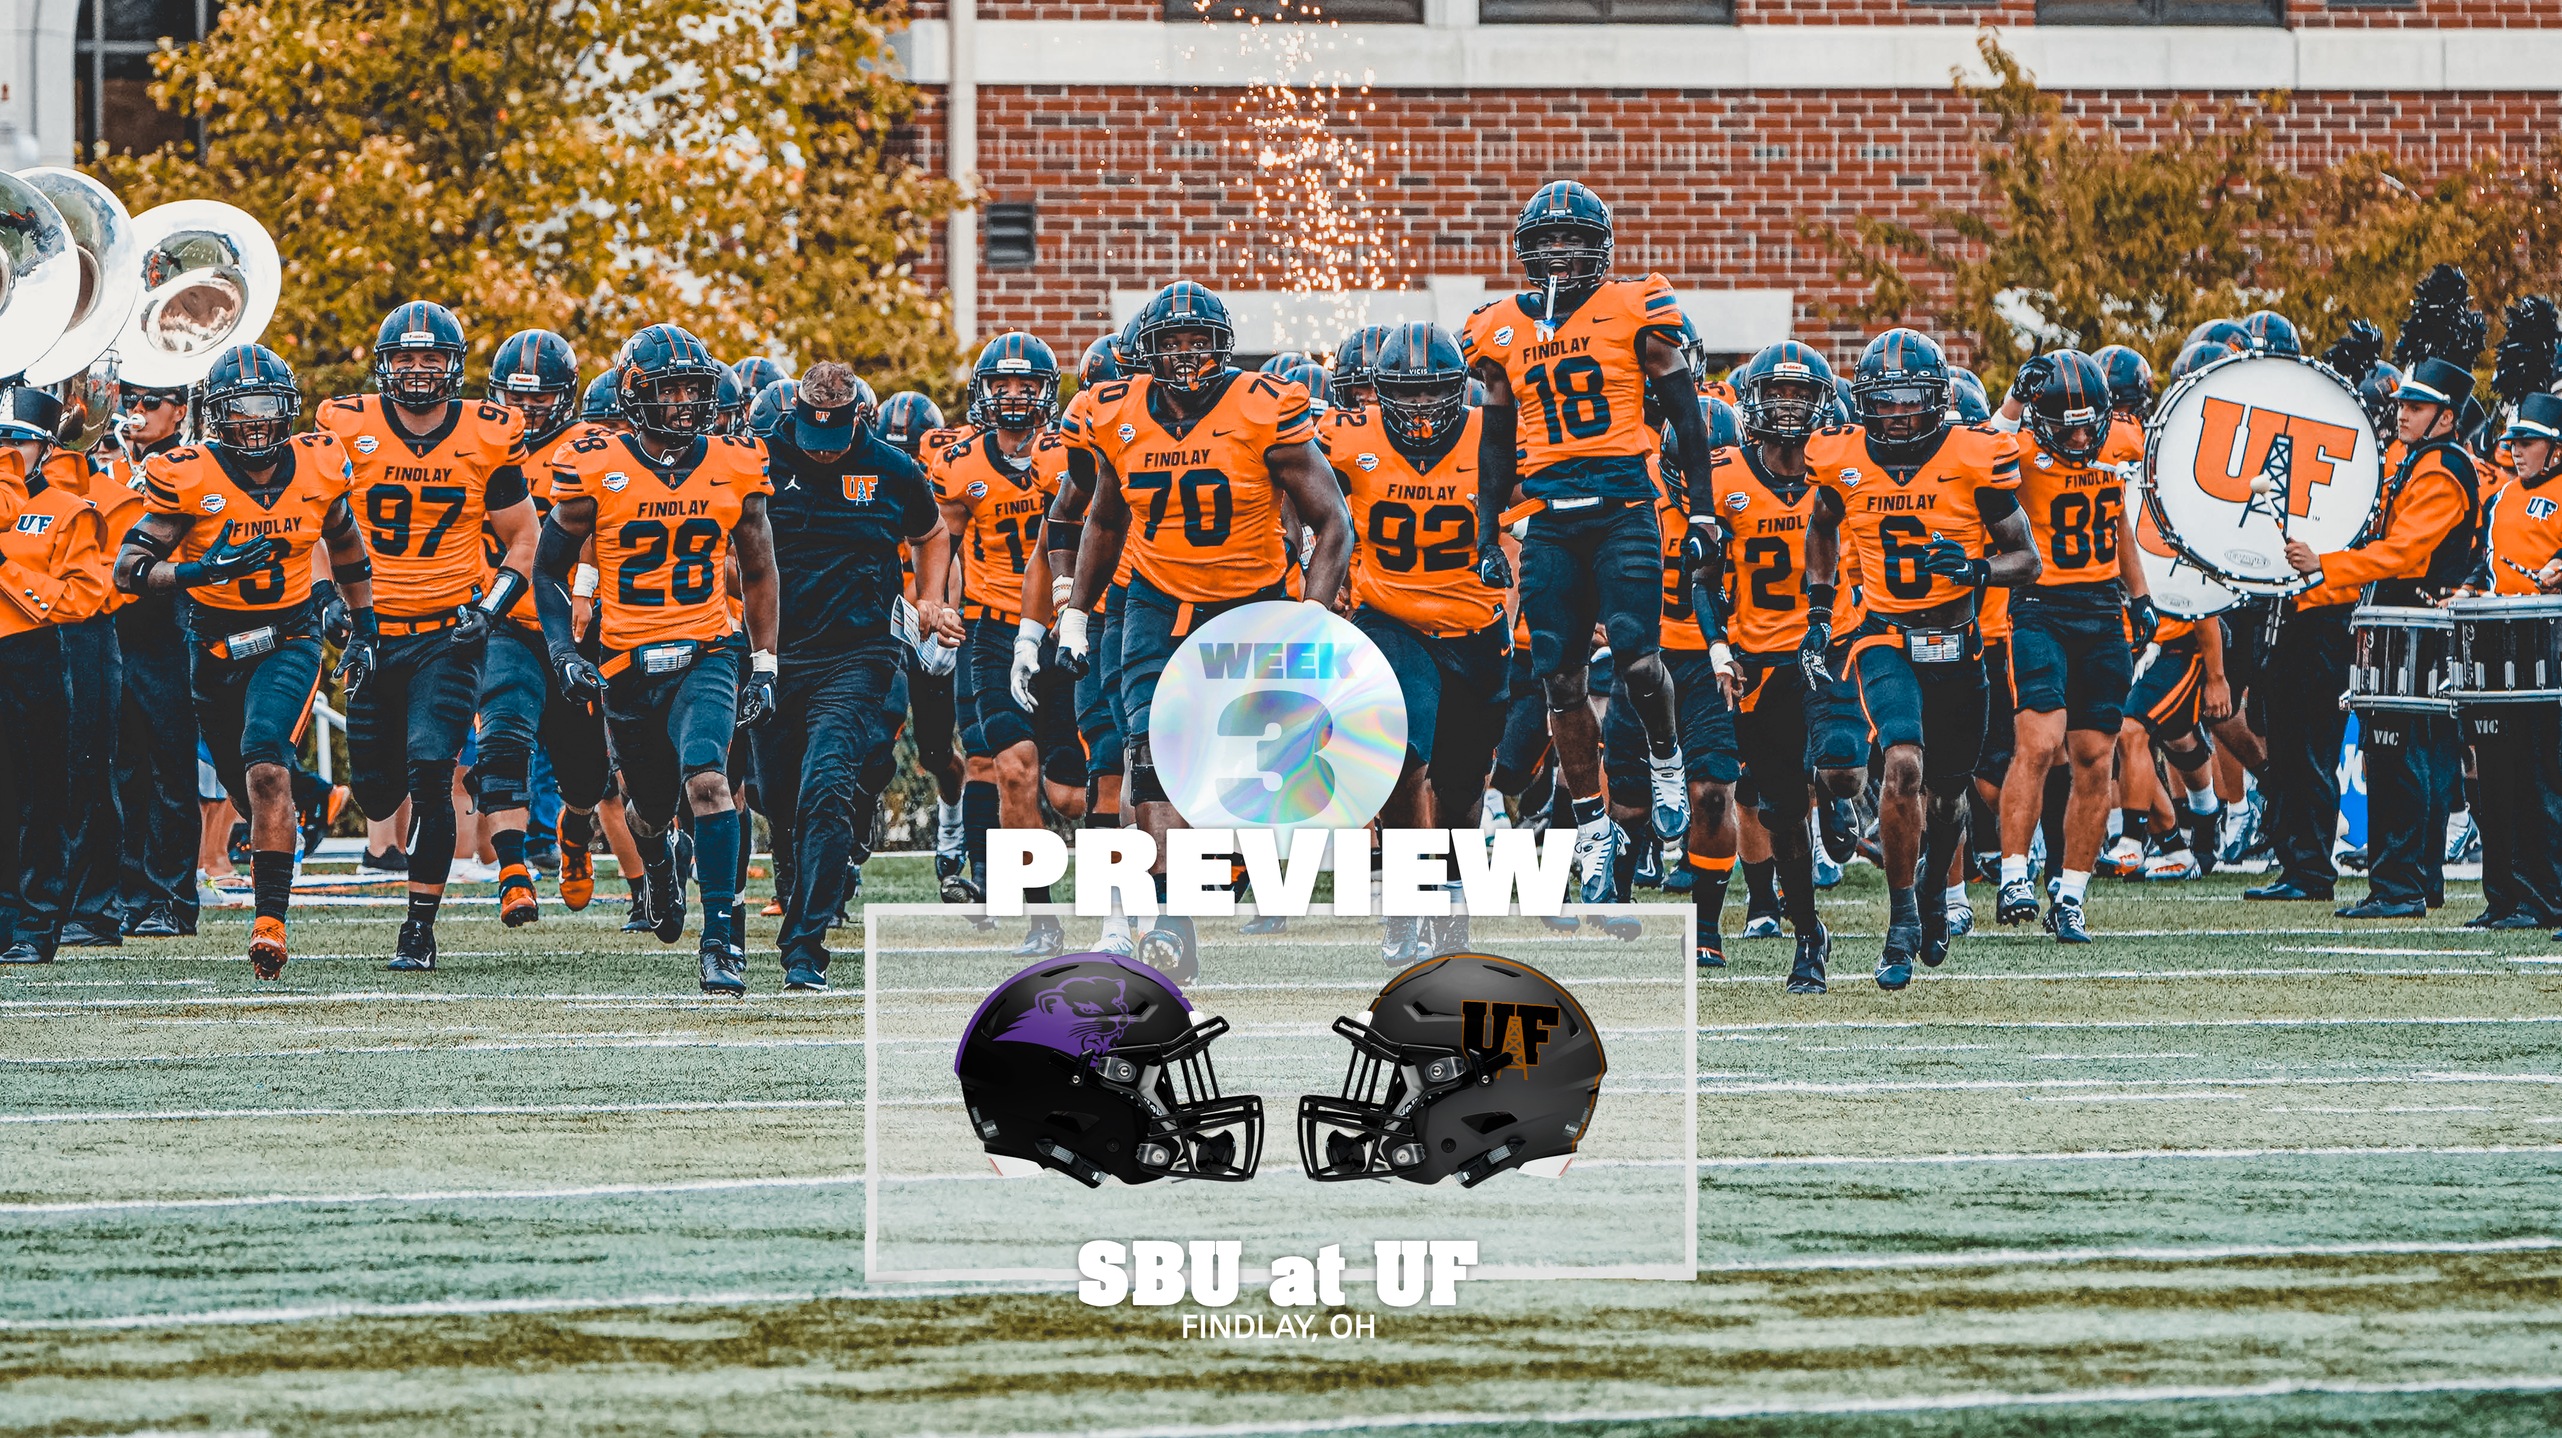 Week 3 Preview | Findlay Welcomes GLVC Opponent Southwest Baptist